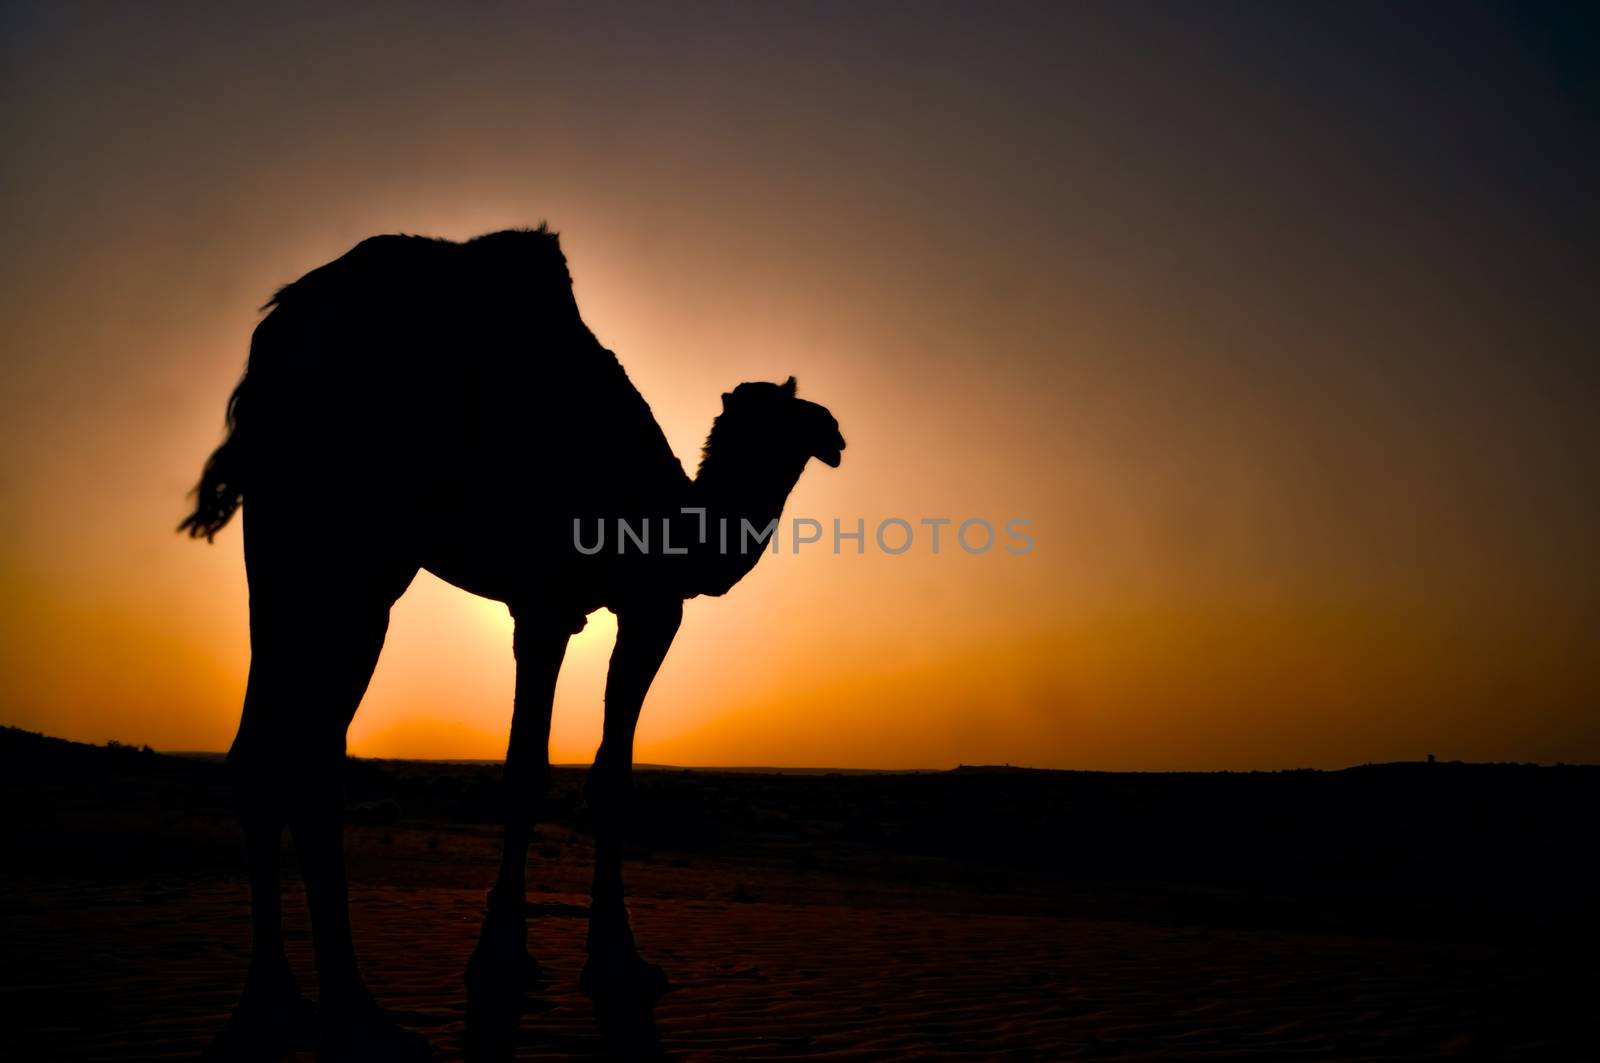 Silhouette of lone dromedary camel with late evening sun in That desert